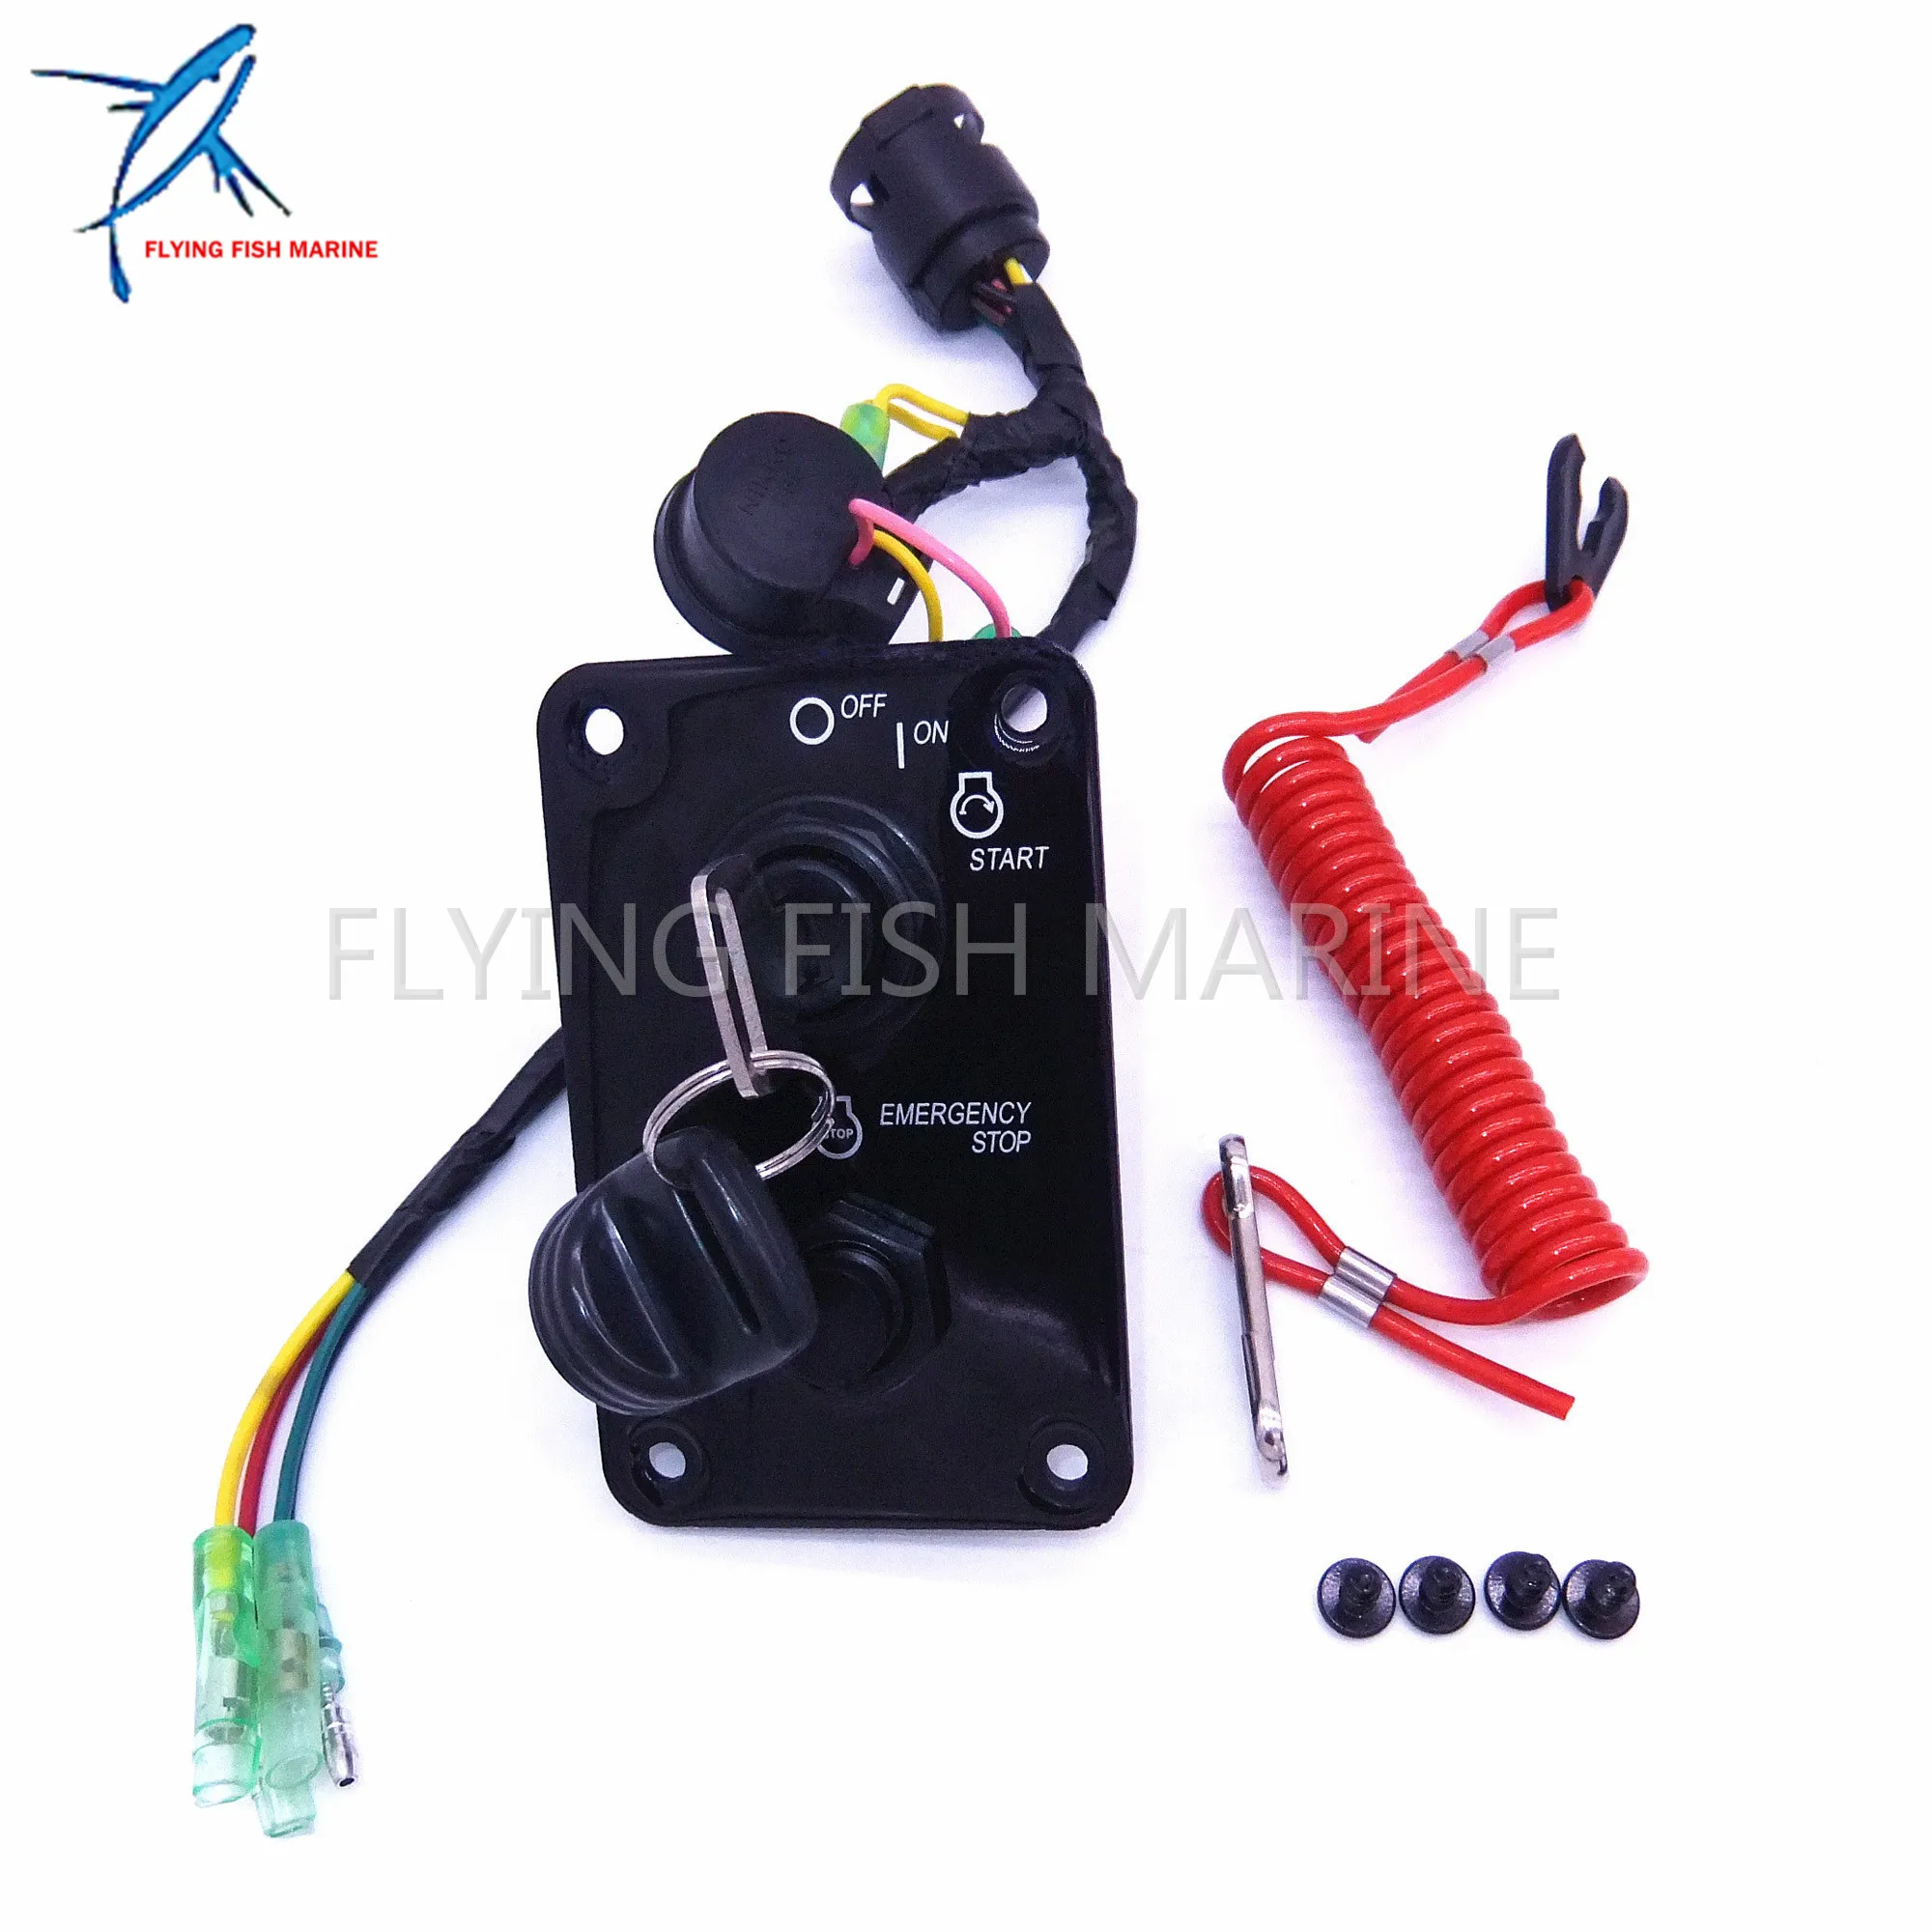 704-82570 704-82570-11-00 704-82570-12-00 704-82570-08-00 Outboard Single Engine Switch Panel Main Switch Assembly for Yamaha